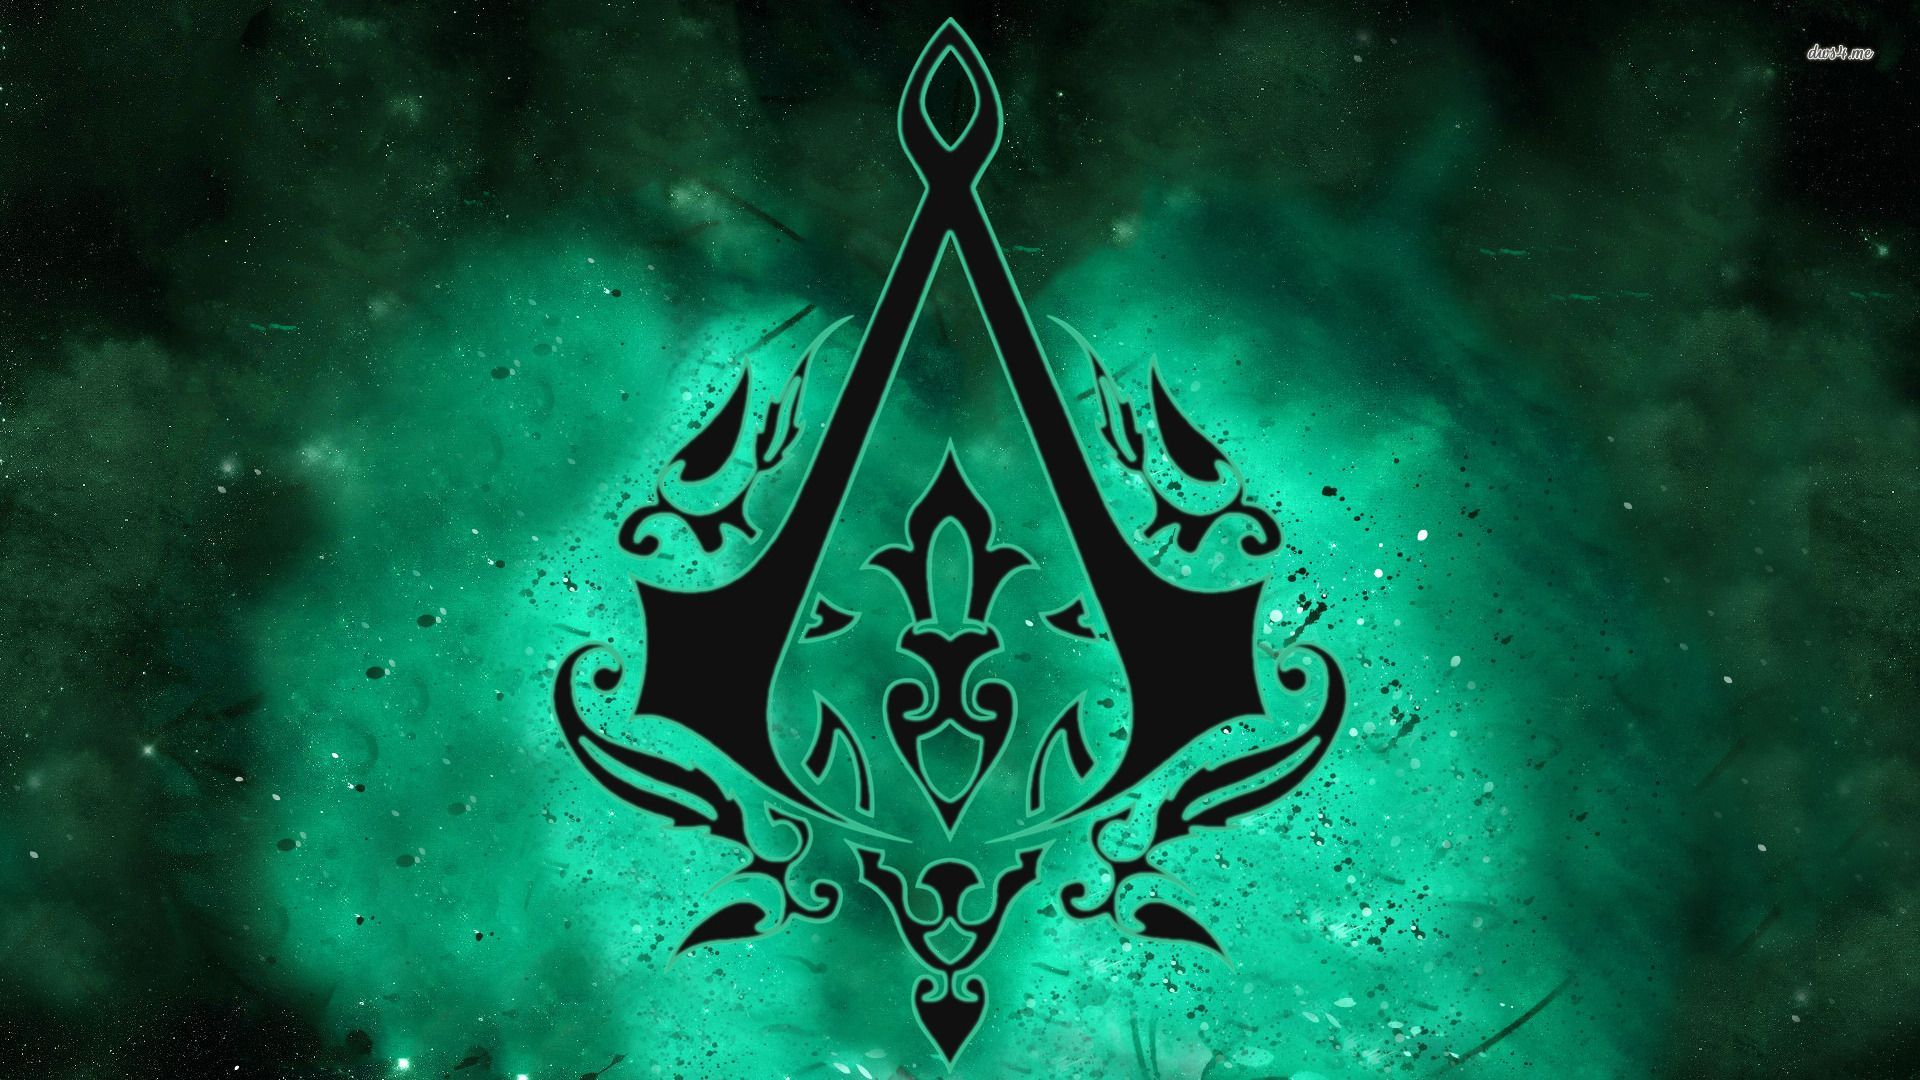 What is the best Assassin's Creed symbol?